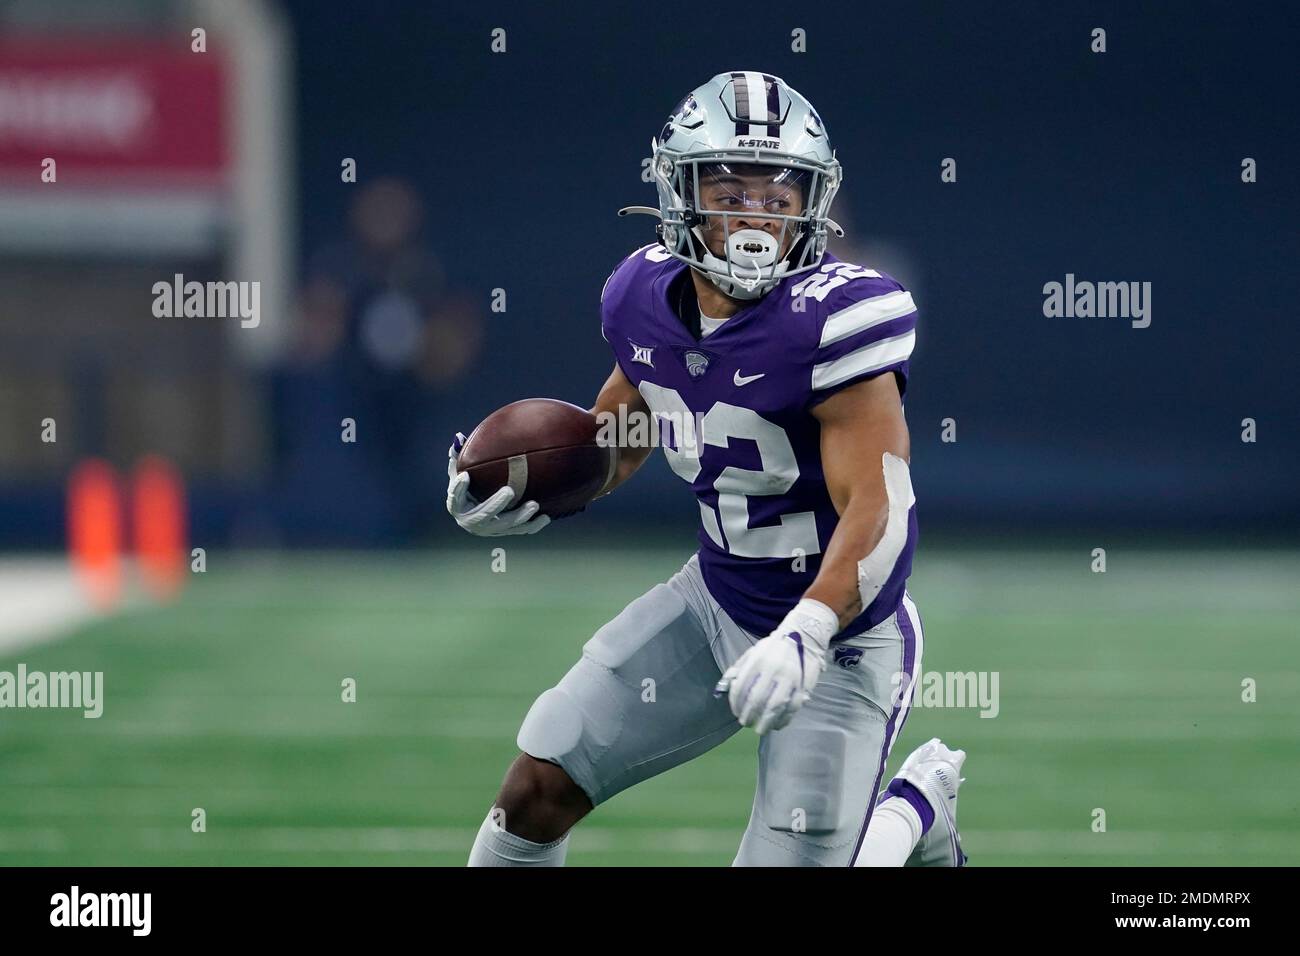 Kansas State running back Deuce Vaughn carries the ball during an NCAA  college football game against Stanford in Arlington, Texas, Saturday, Sept.  4, 2021. (AP Photo/Tony Gutierrez Stock Photo - Alamy